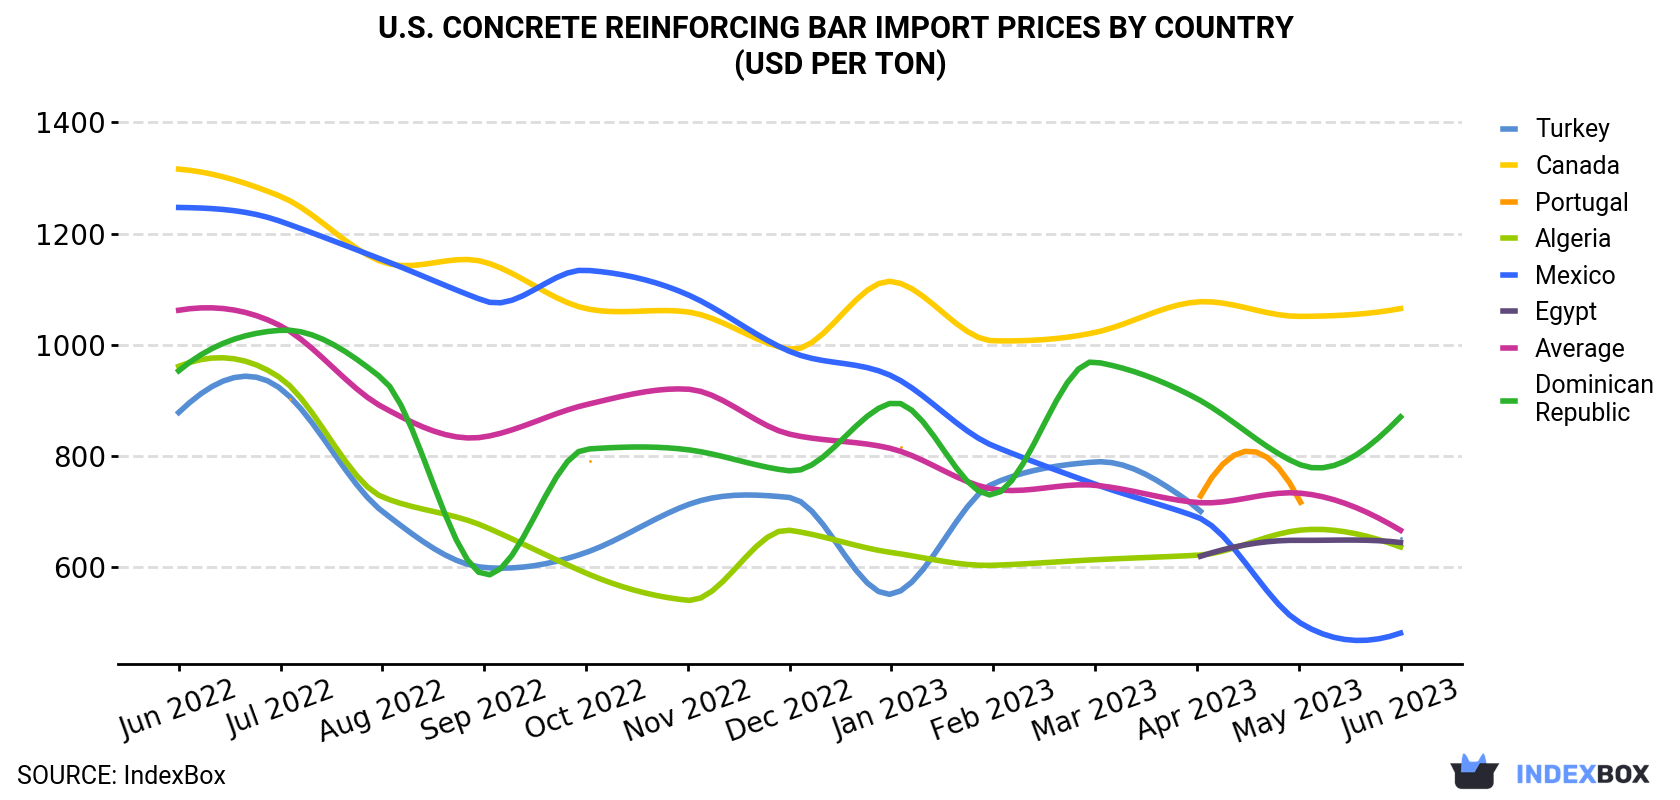 U.S. Concrete Reinforcing Bar Import Prices By Country (USD Per Ton)